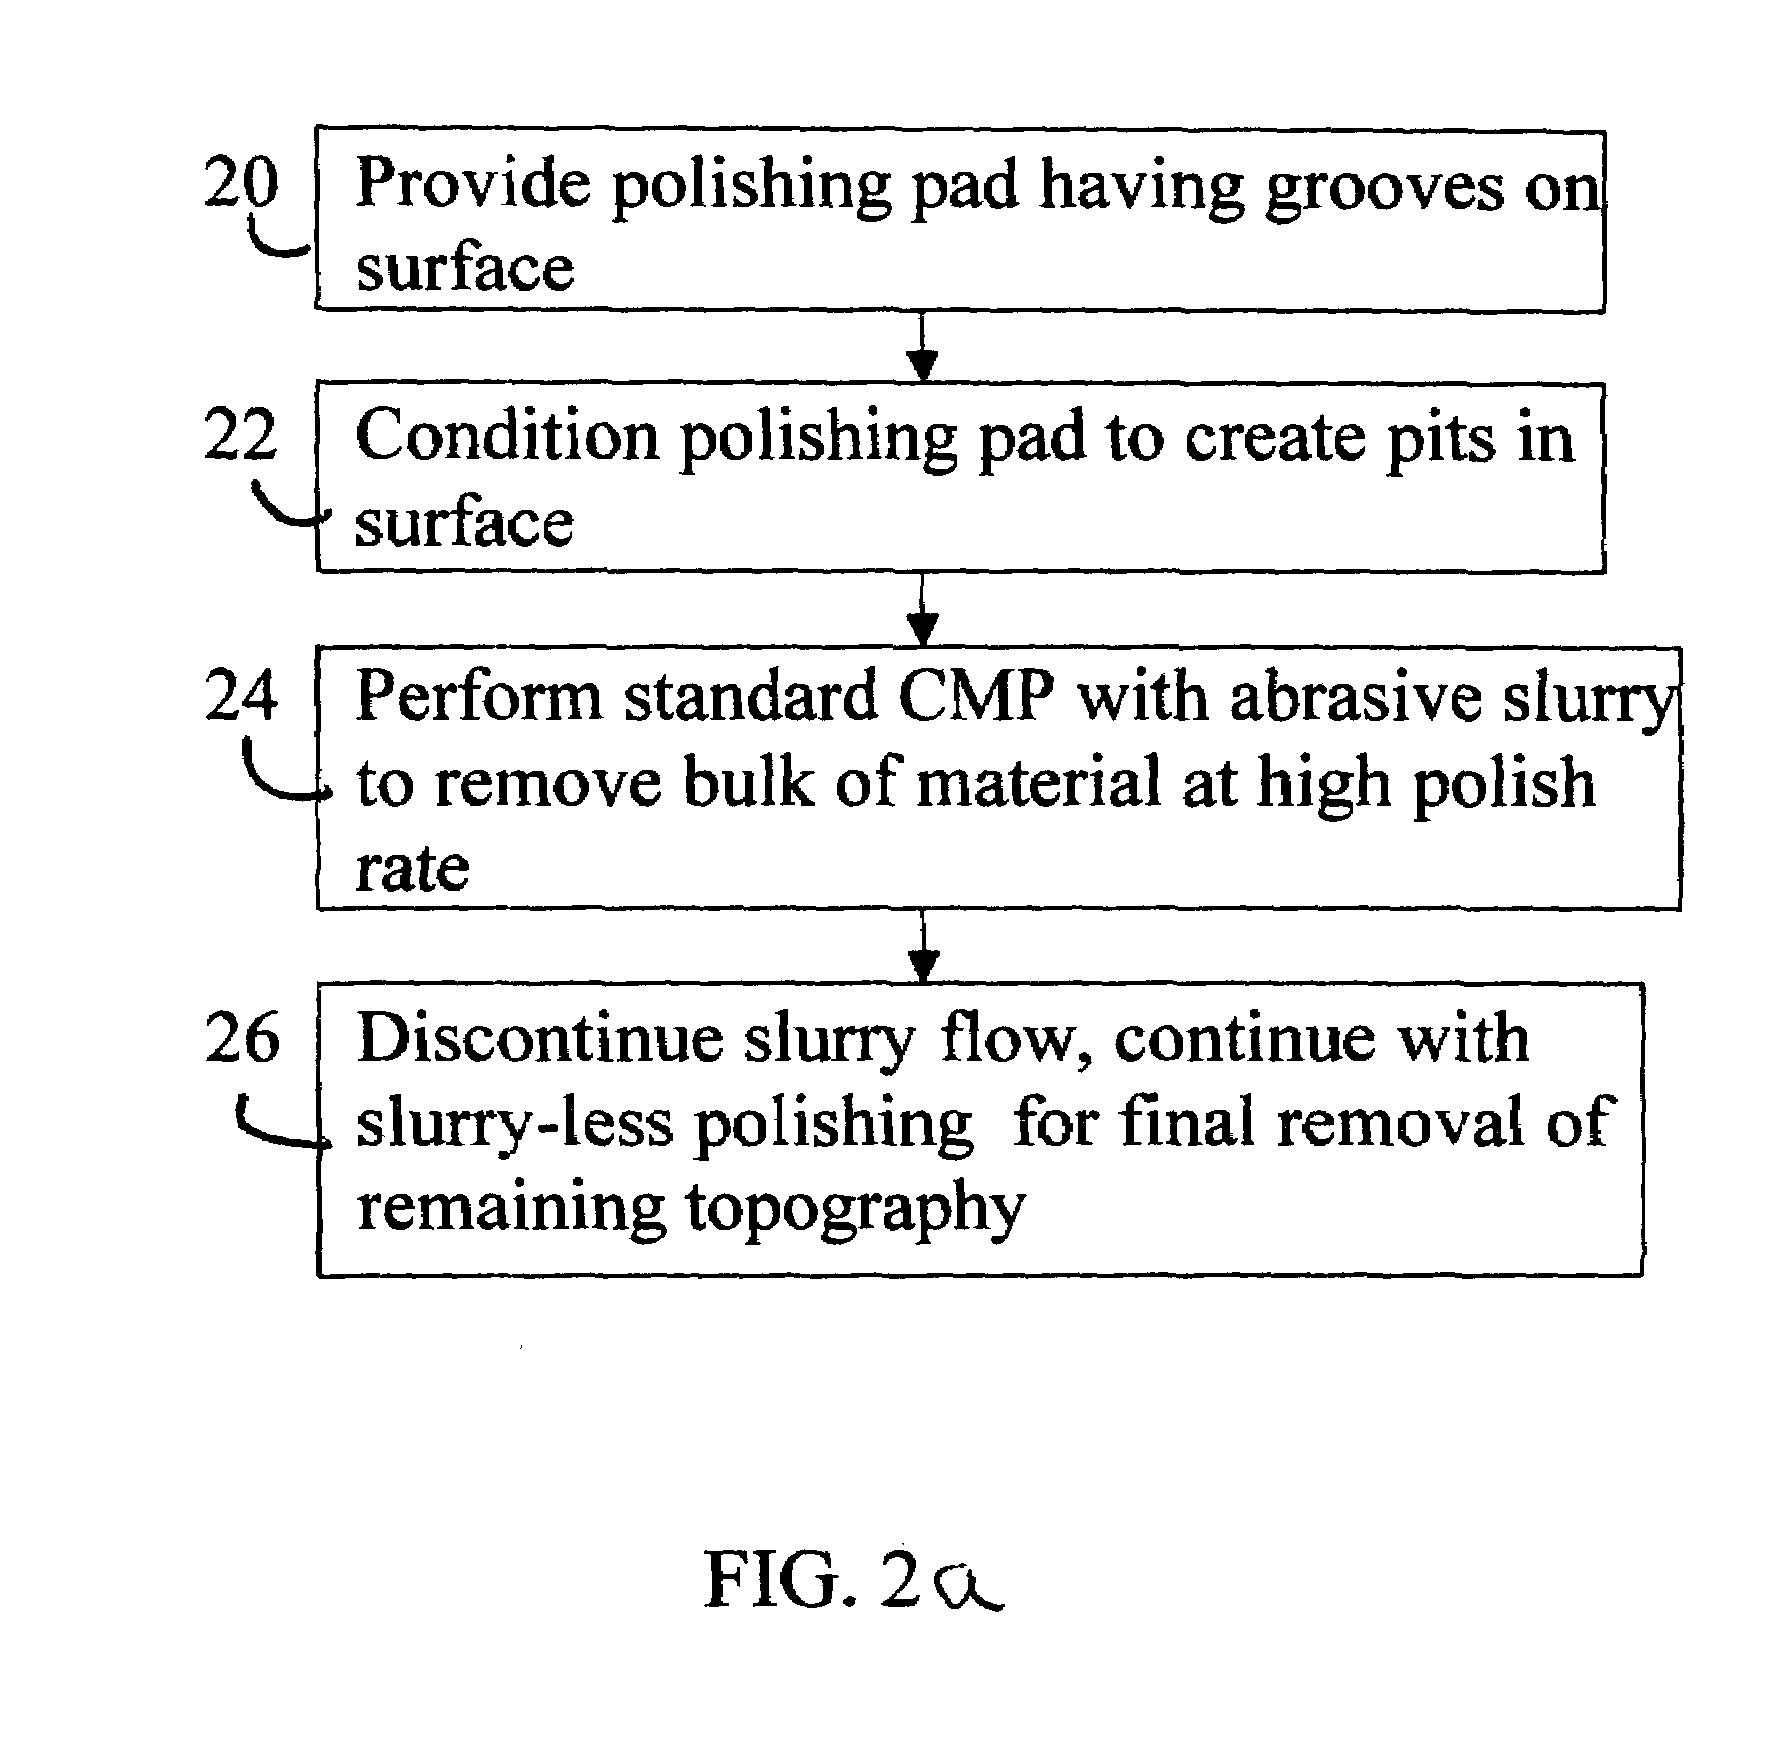 Slurry-less polishing for removal of excess interconnect material during fabrication of a silicon integrated circuit